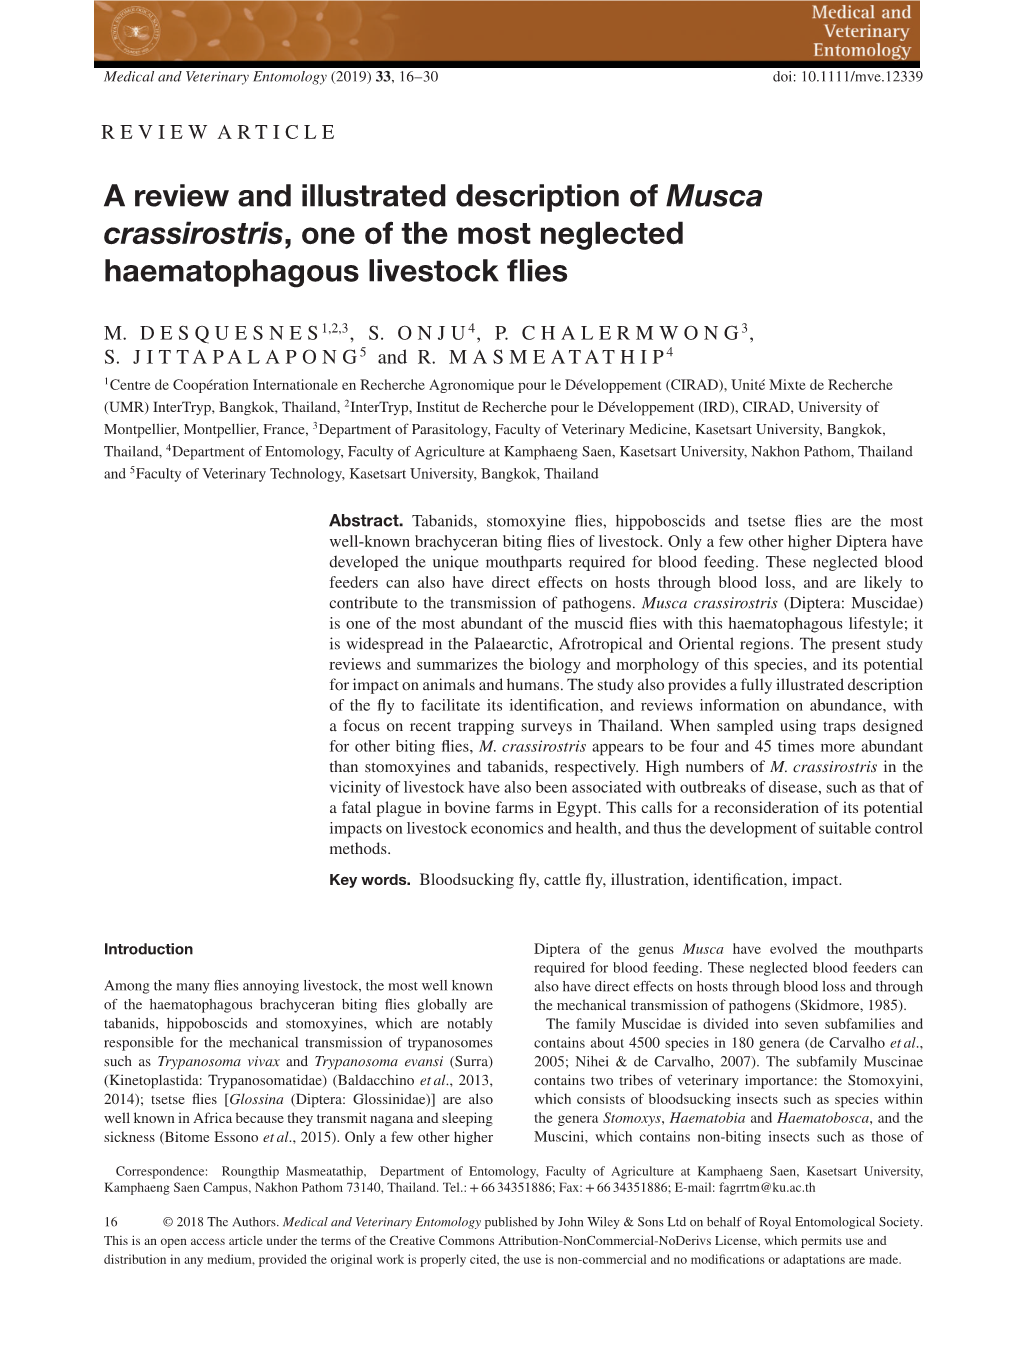 A Review and Illustrated Description of Musca Crassirostris, One of the Most Neglected Haematophagous Livestock ﬂies